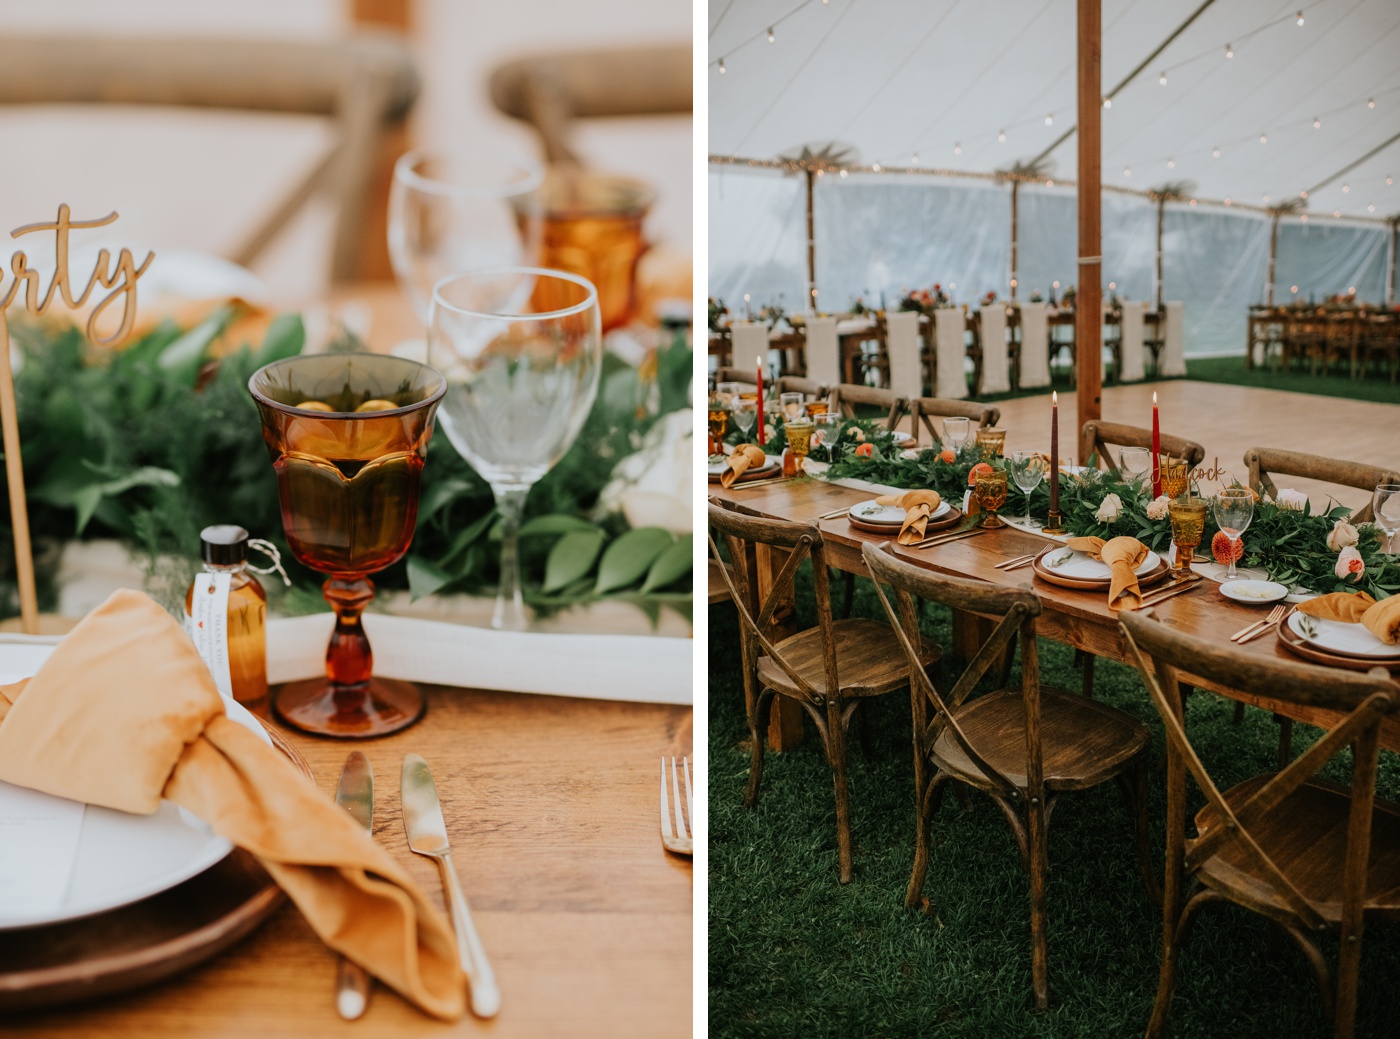 Marigold tablecloths, amber glasses, and honey napkins for a fall tented wedding reception